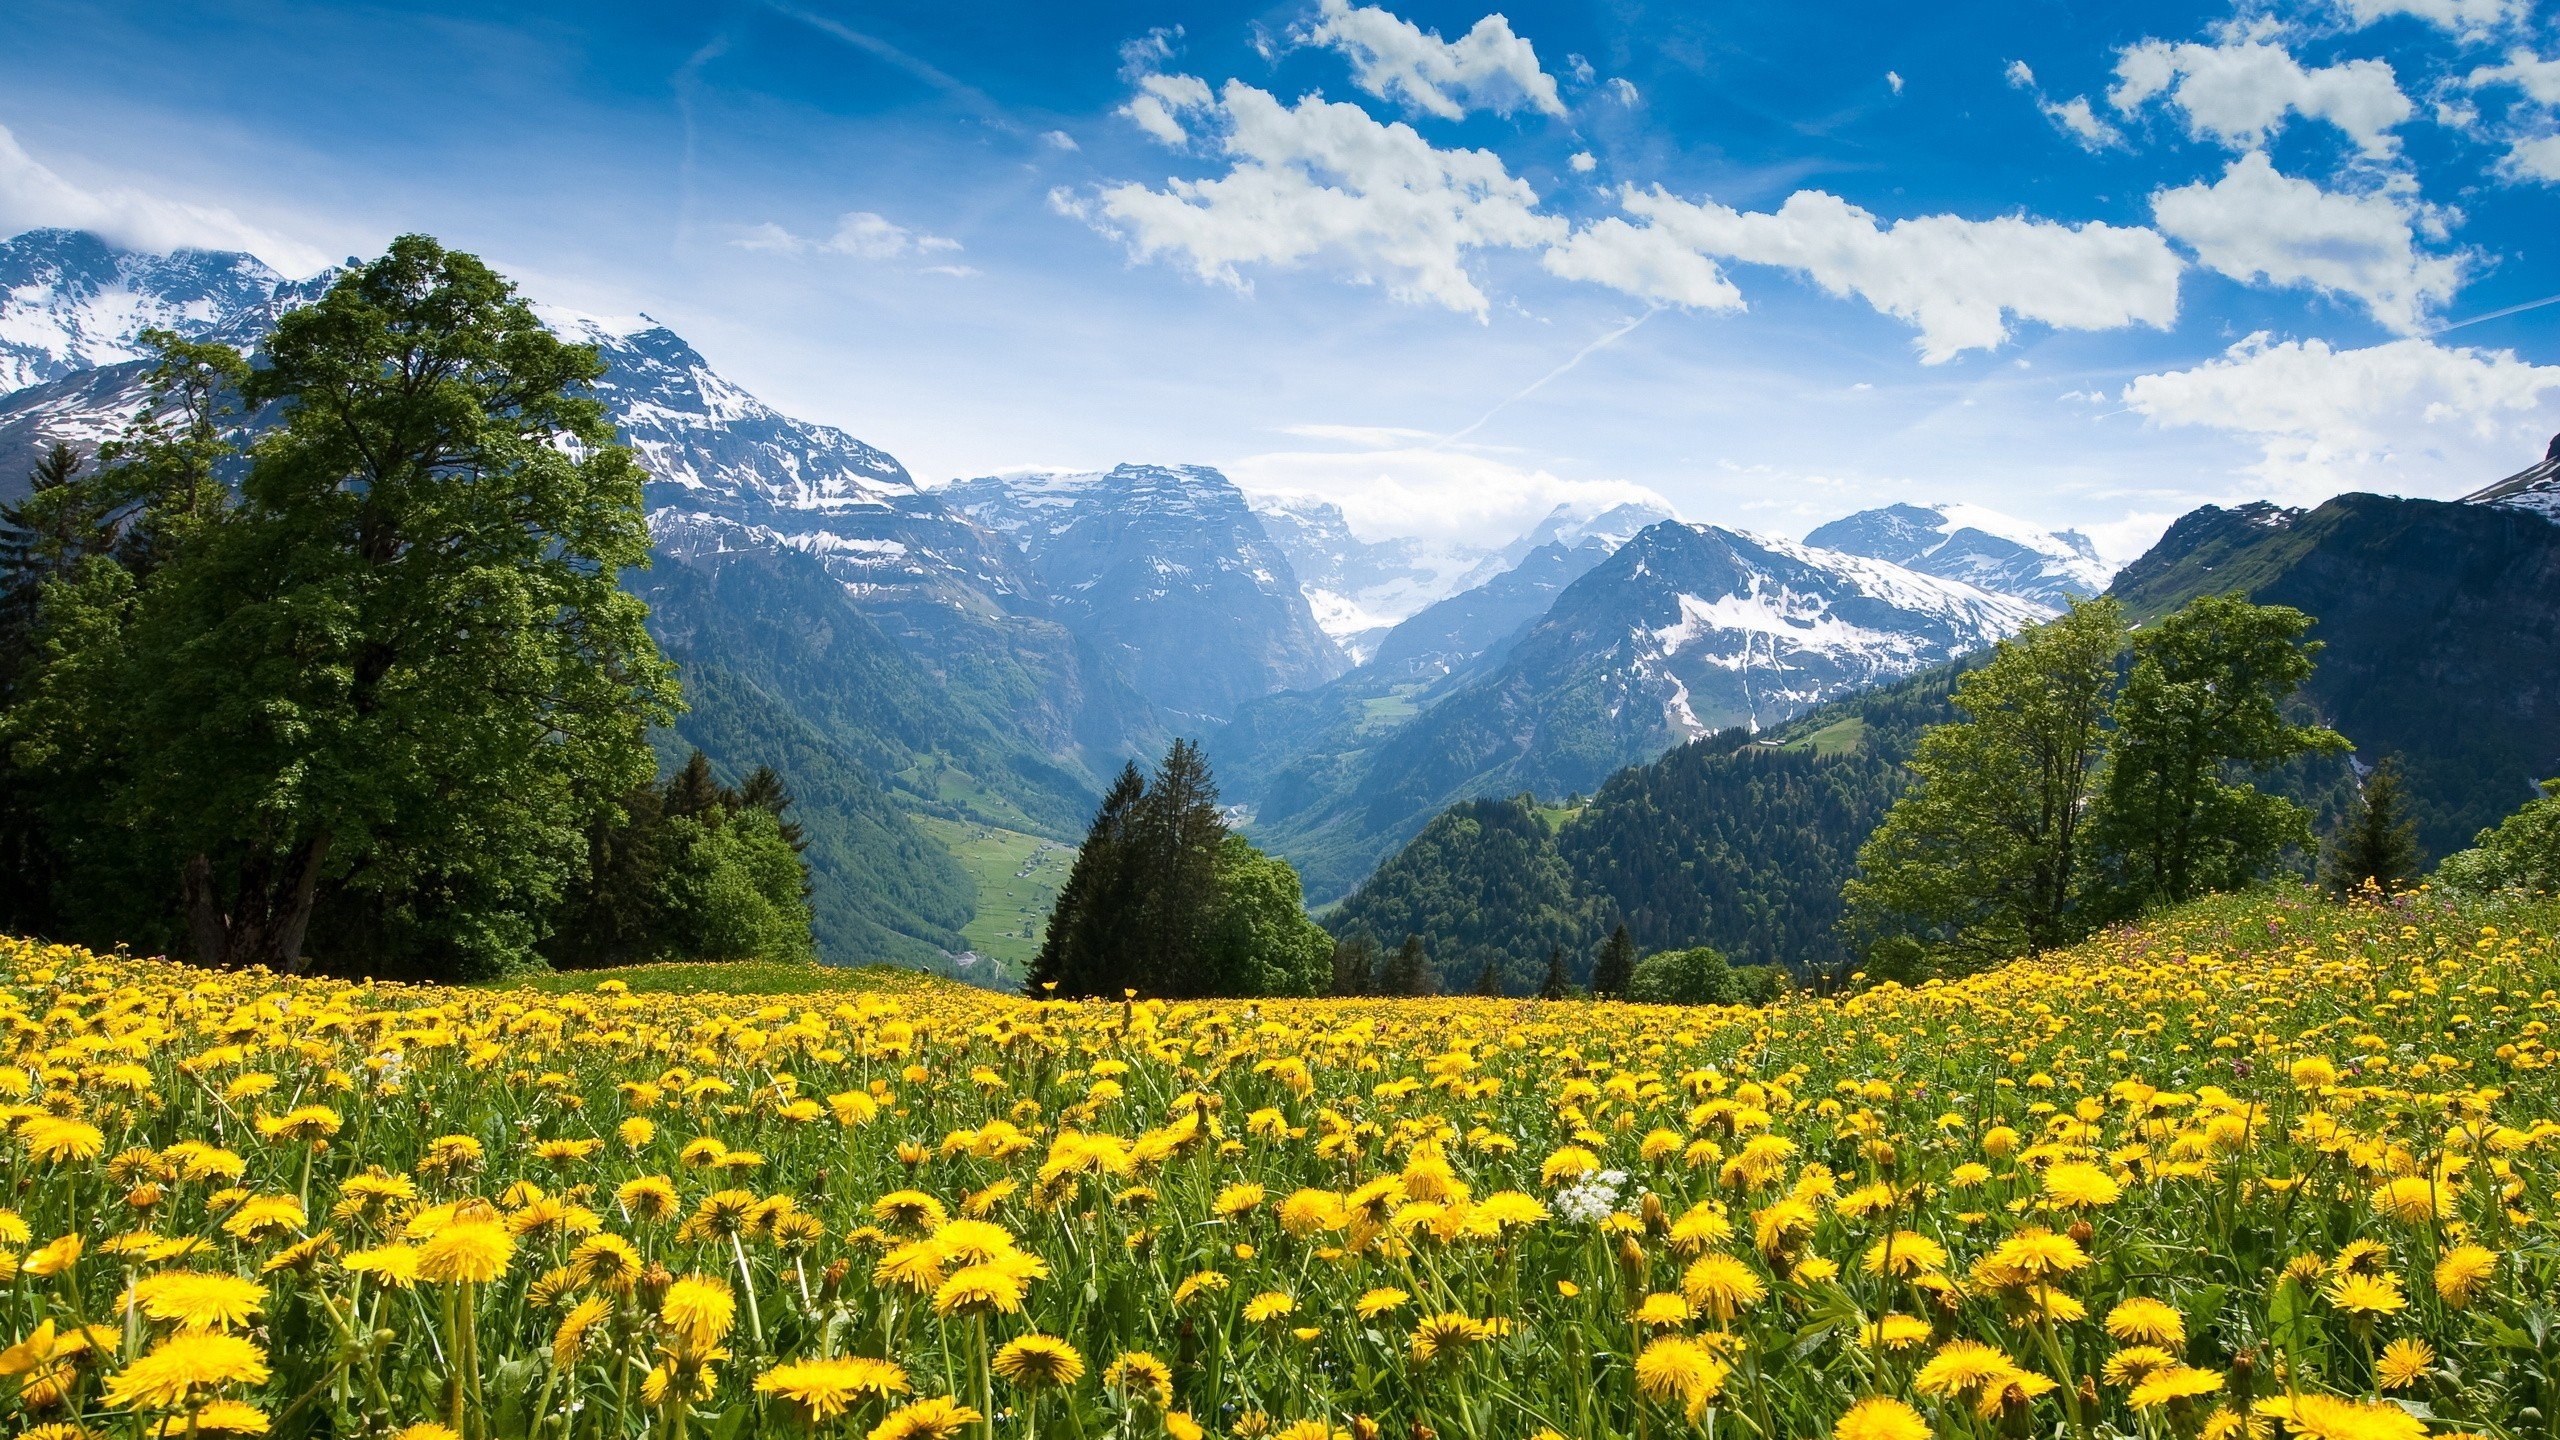 mountains, Landscape, Nature, Mountain, Spring, Meadow, Flowers Wallpaper